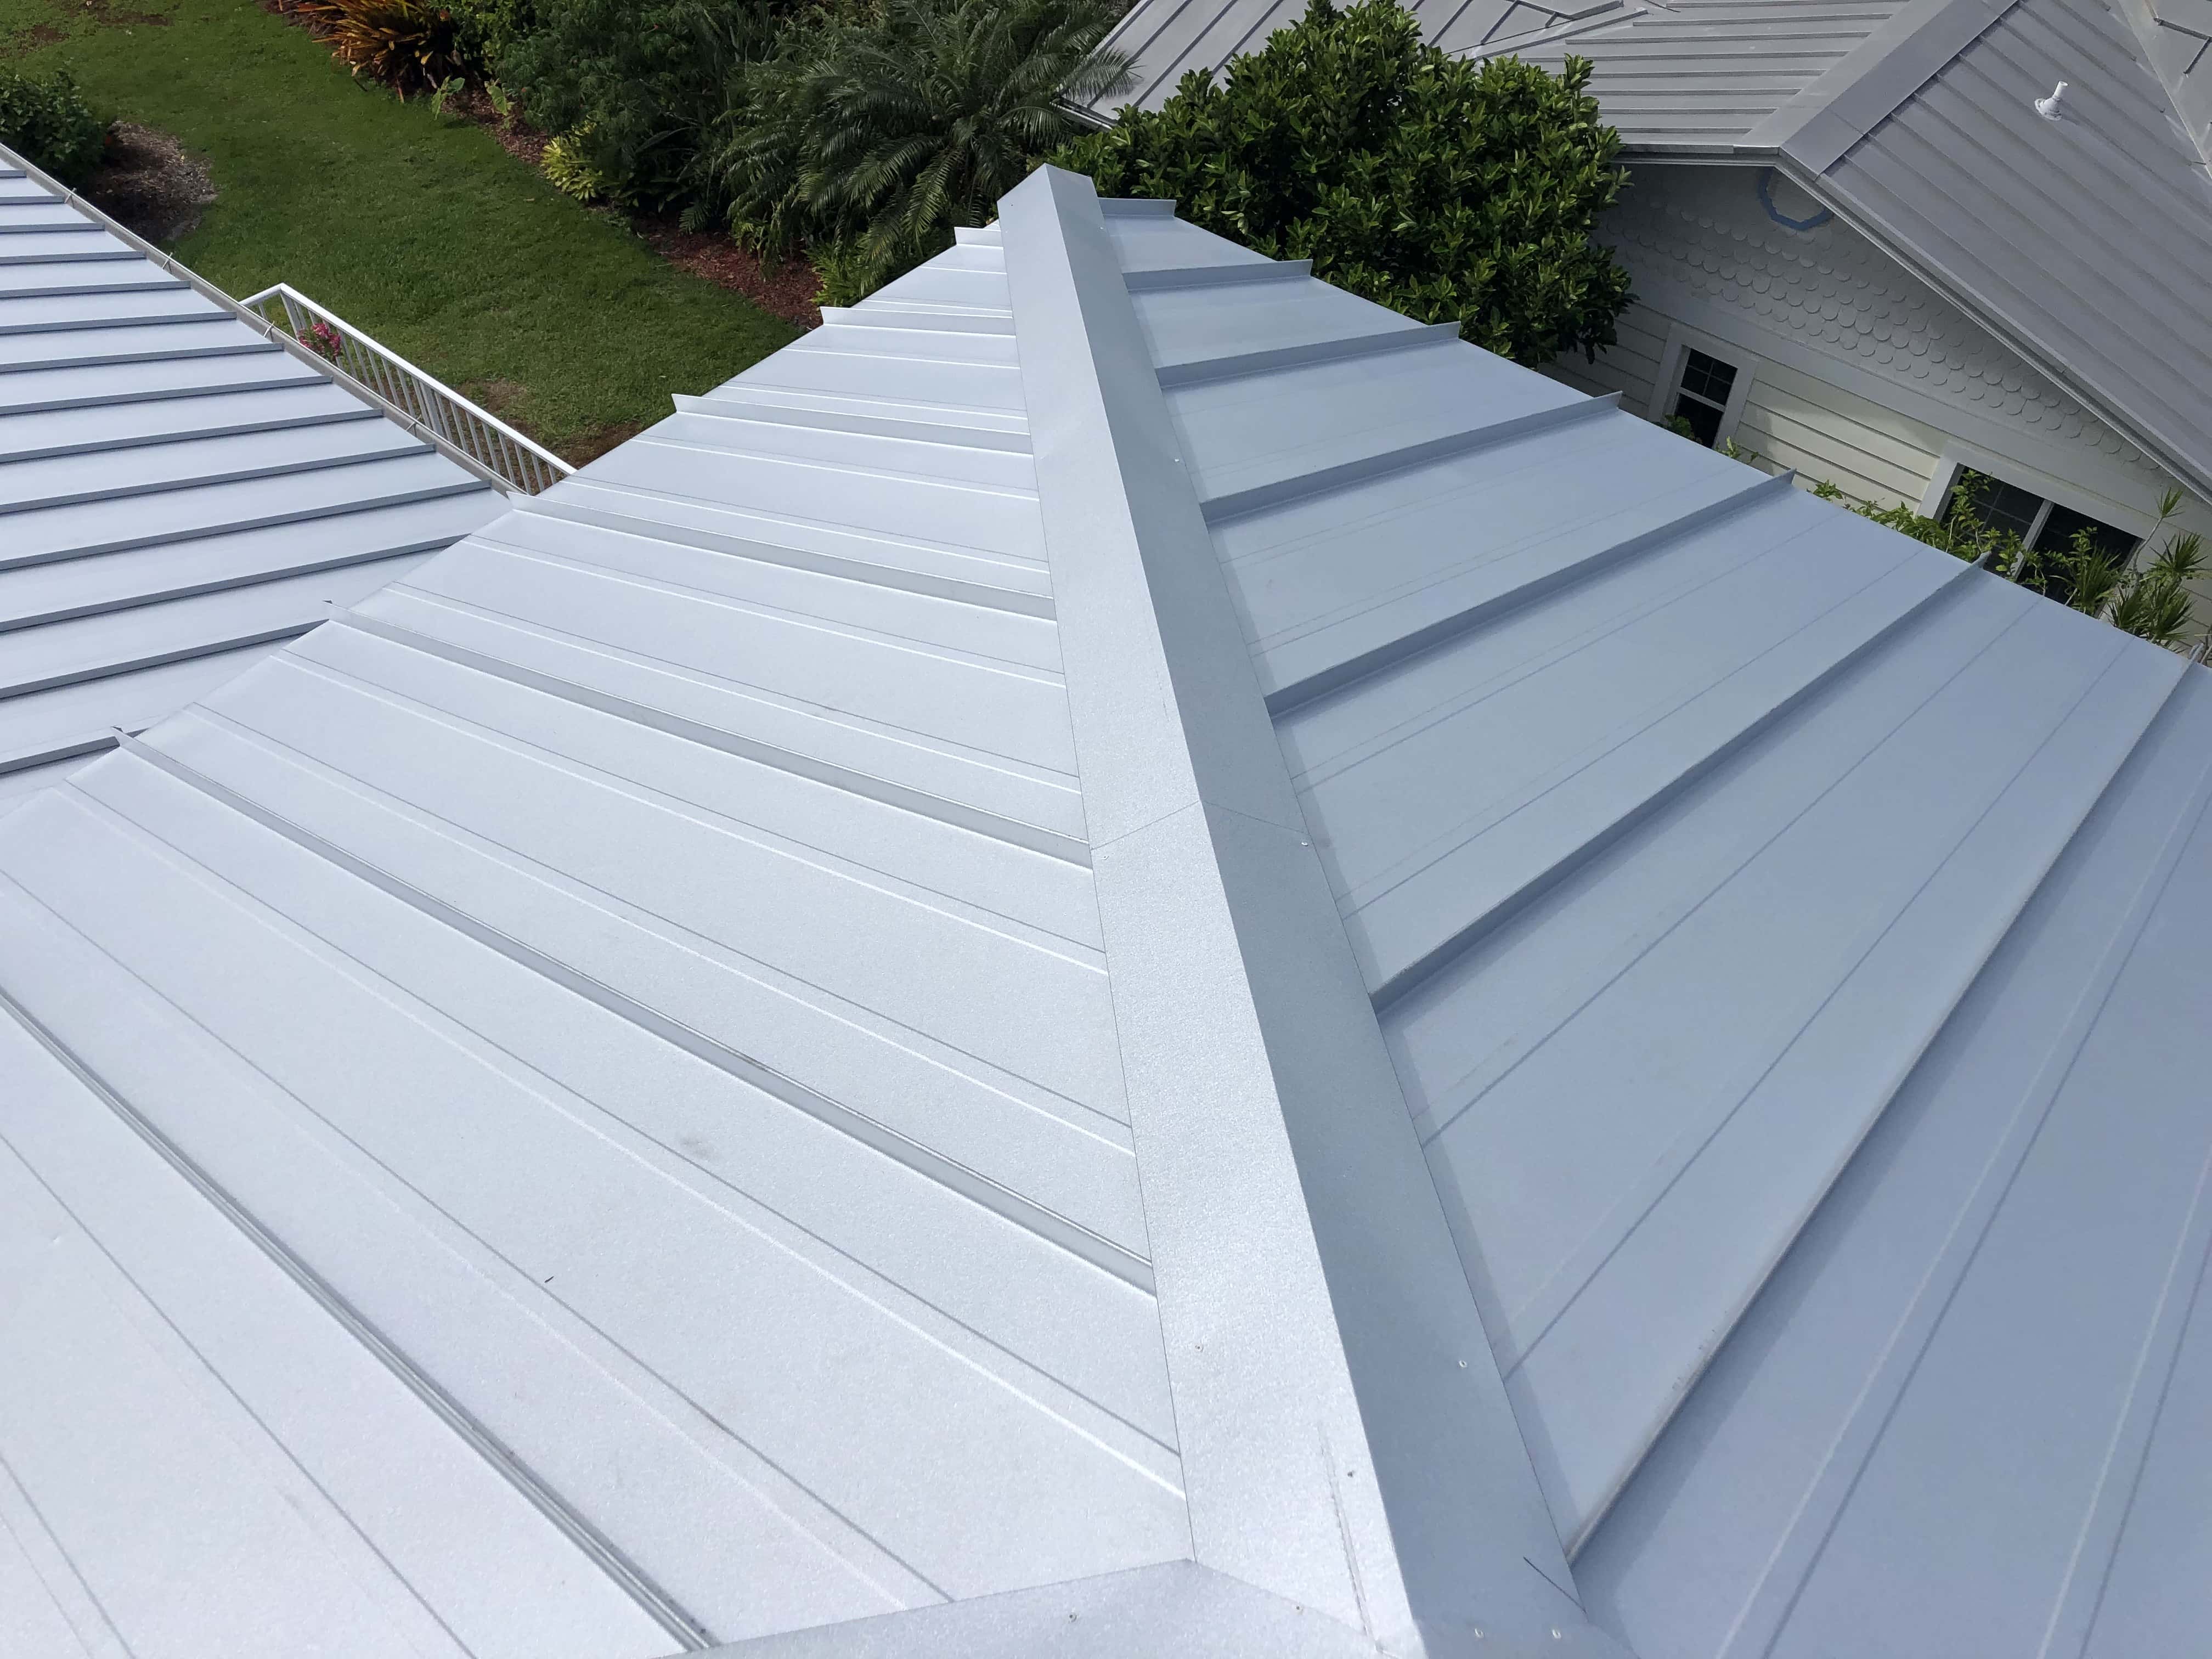 D.R. Martineau Roofing & Construction, Inc. - Fort Myers, FL, US, roof tarping